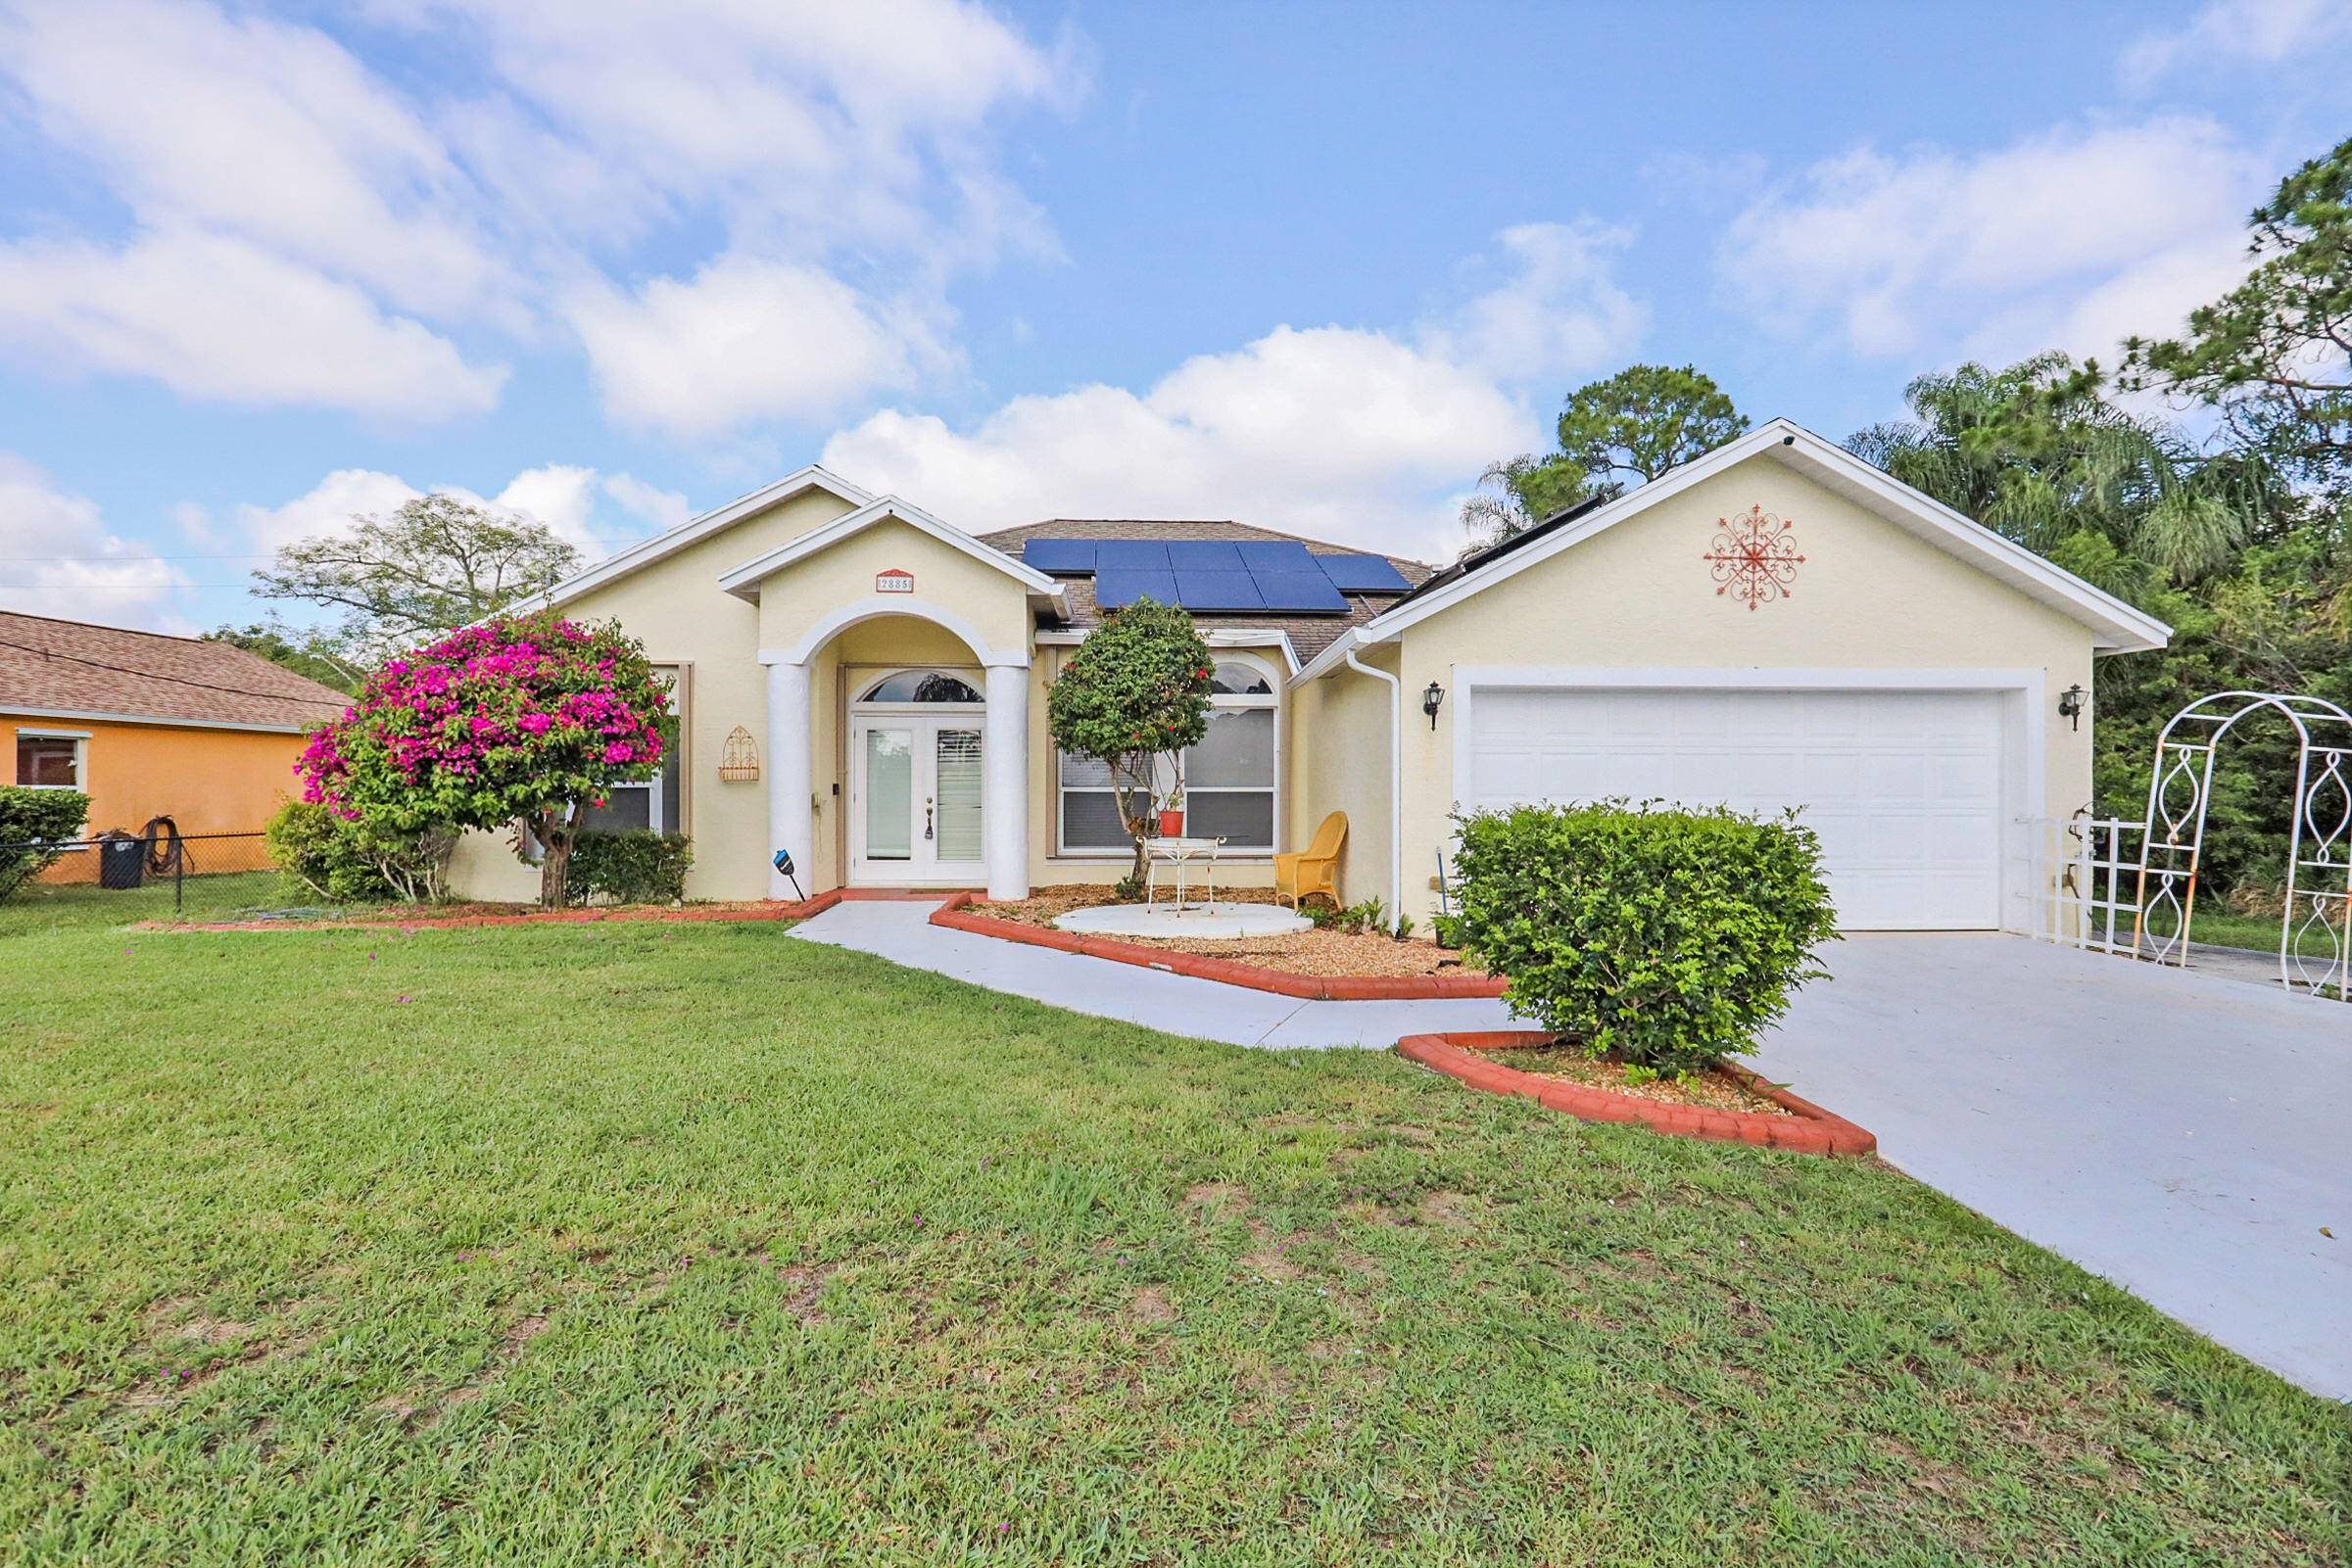 This amazing 3 2 2 pool home has a huge, screened back porch where you can spend your days and evenings enjoying the Florida weather.